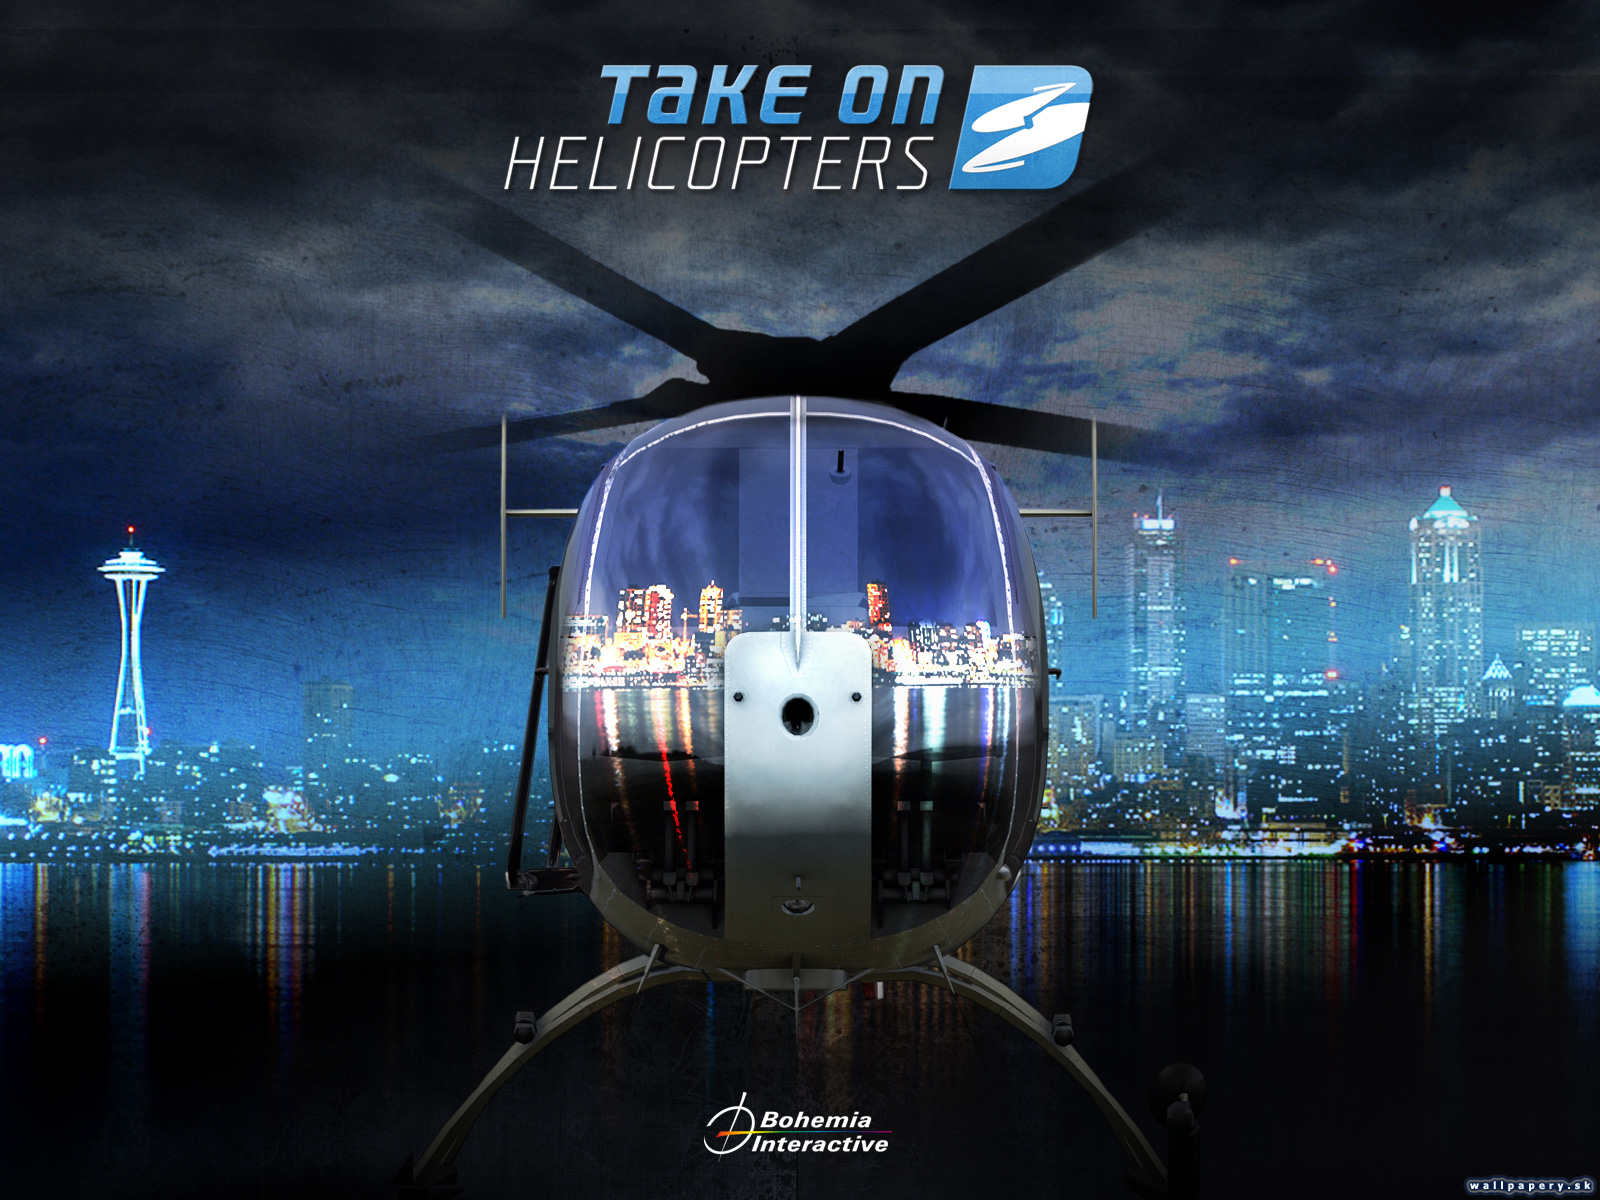 Take On Helicopters - wallpaper 1